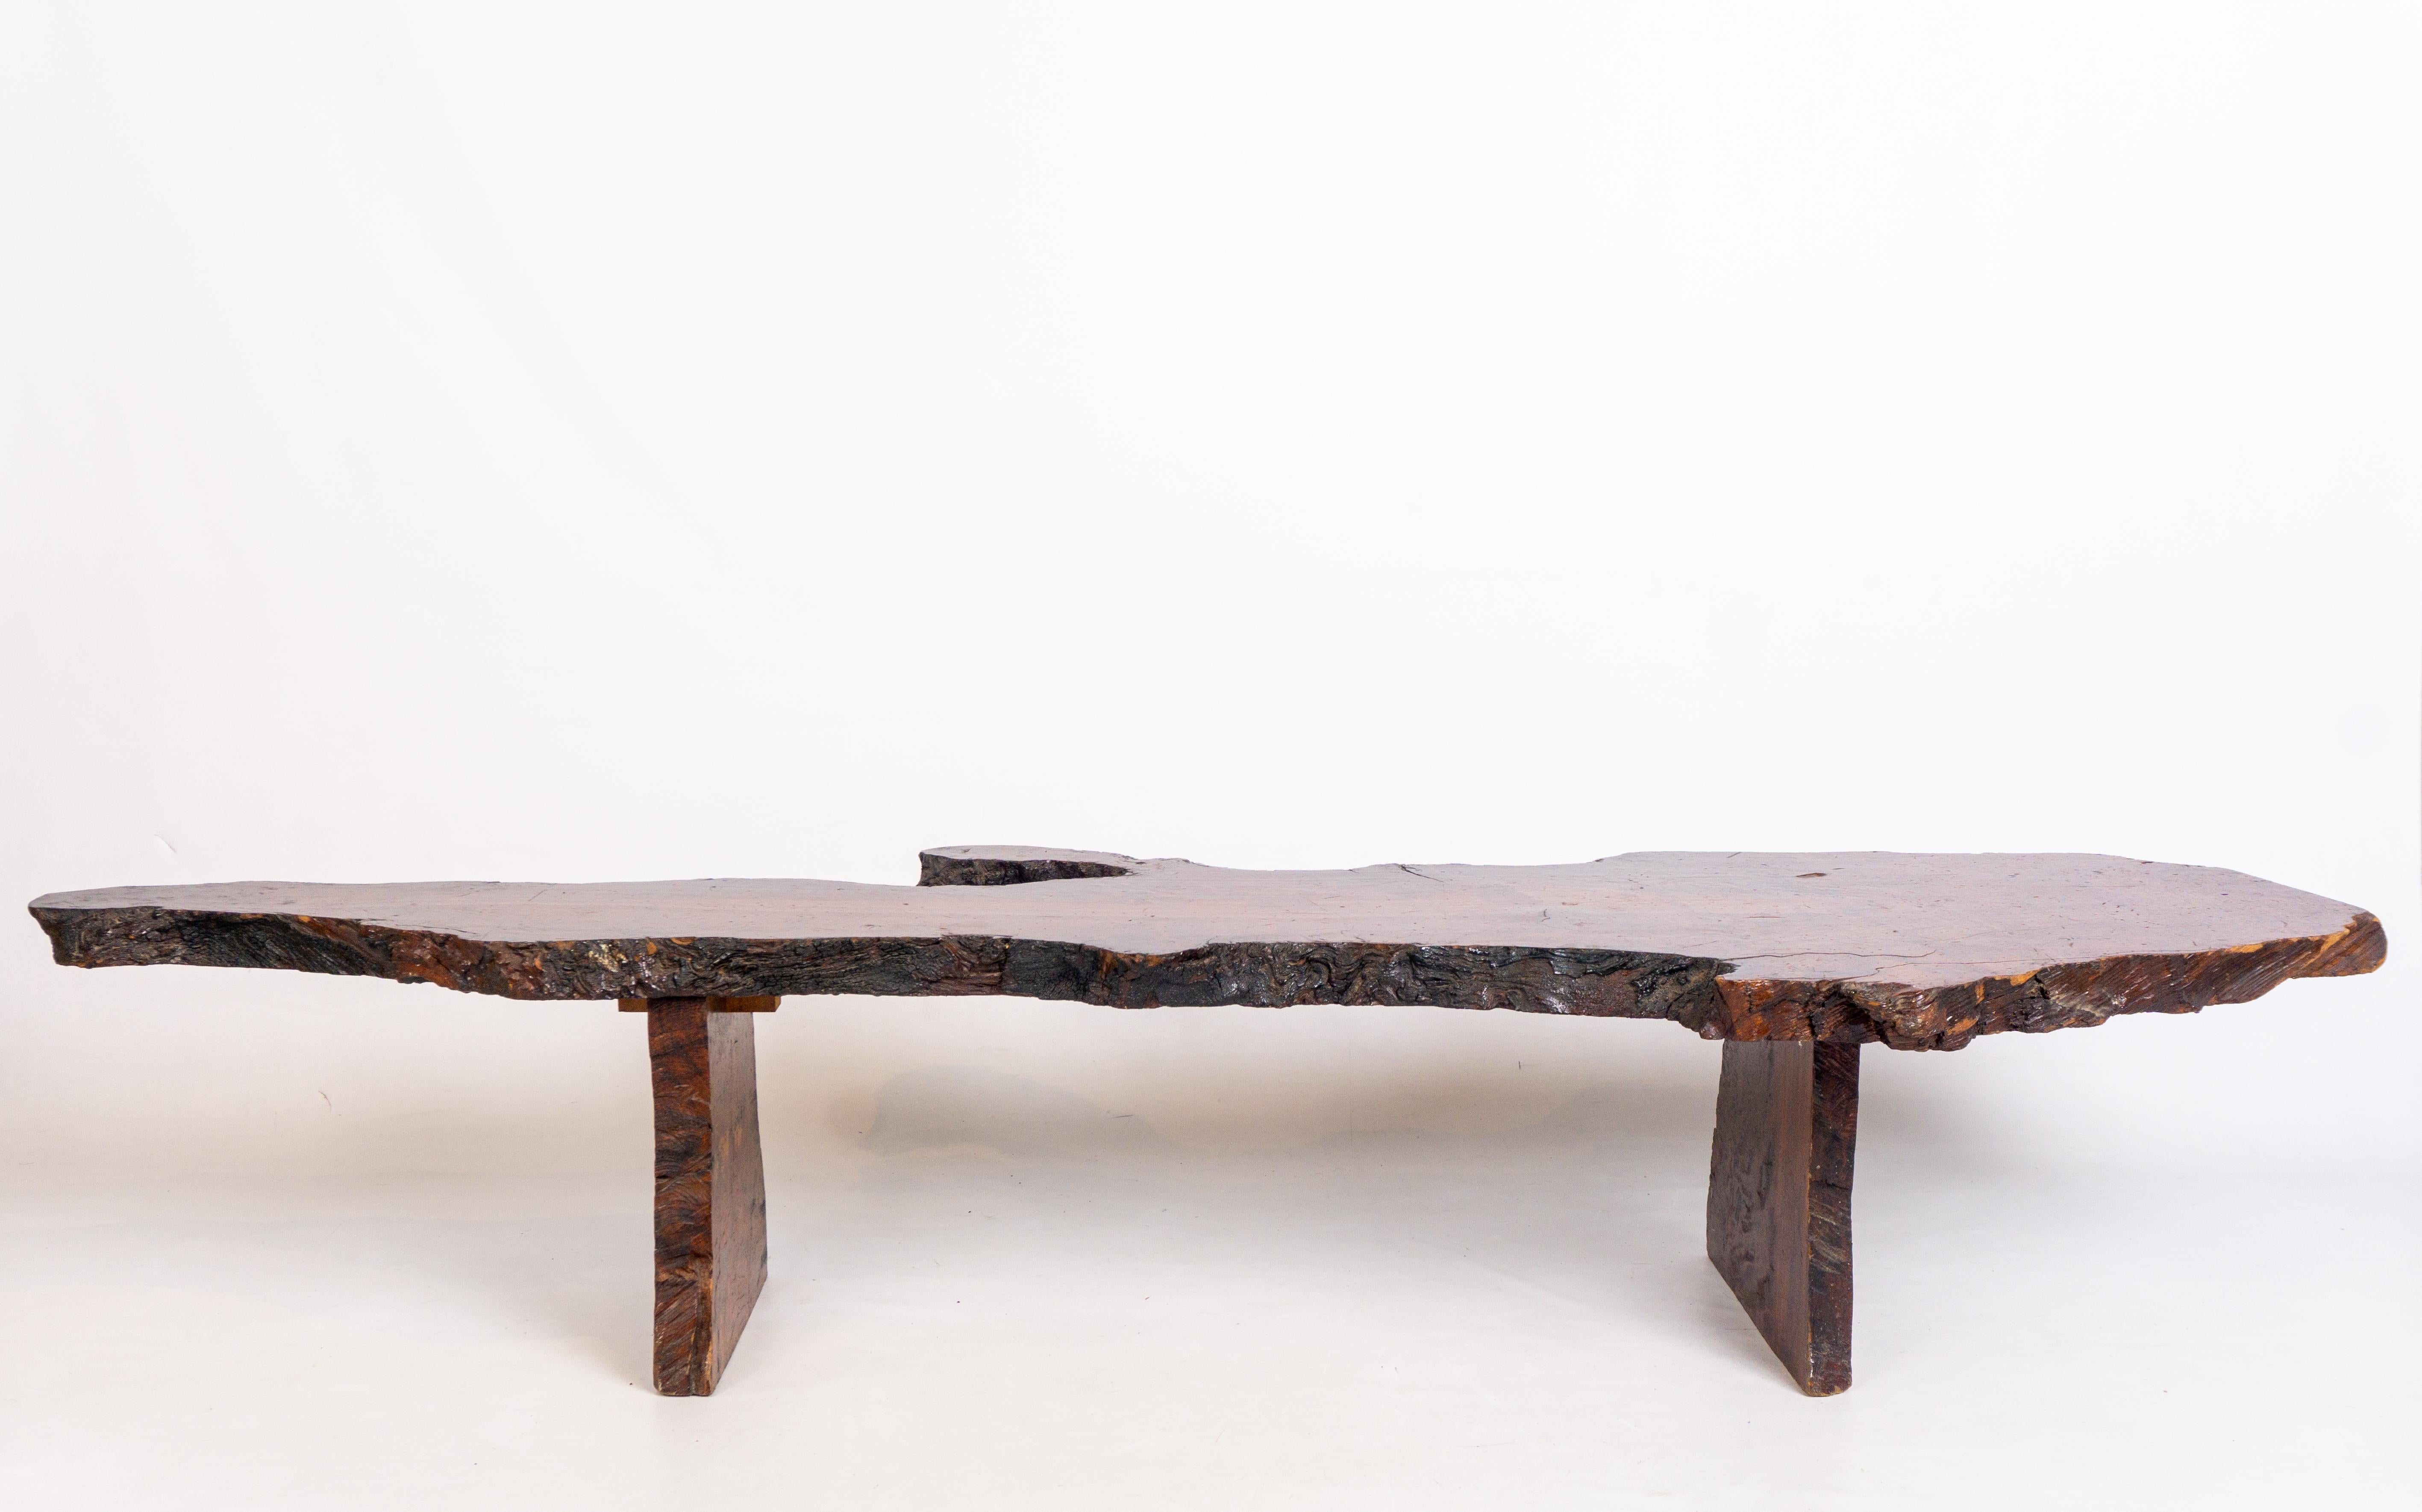 Introducing the Mid-20th Century Live Edge Redwood Bench/Coffee Table, a remarkable piece of furniture that seamlessly blends functionality with artistic flair. Crafted with utmost care and attention to detail, this extraordinary creation exudes